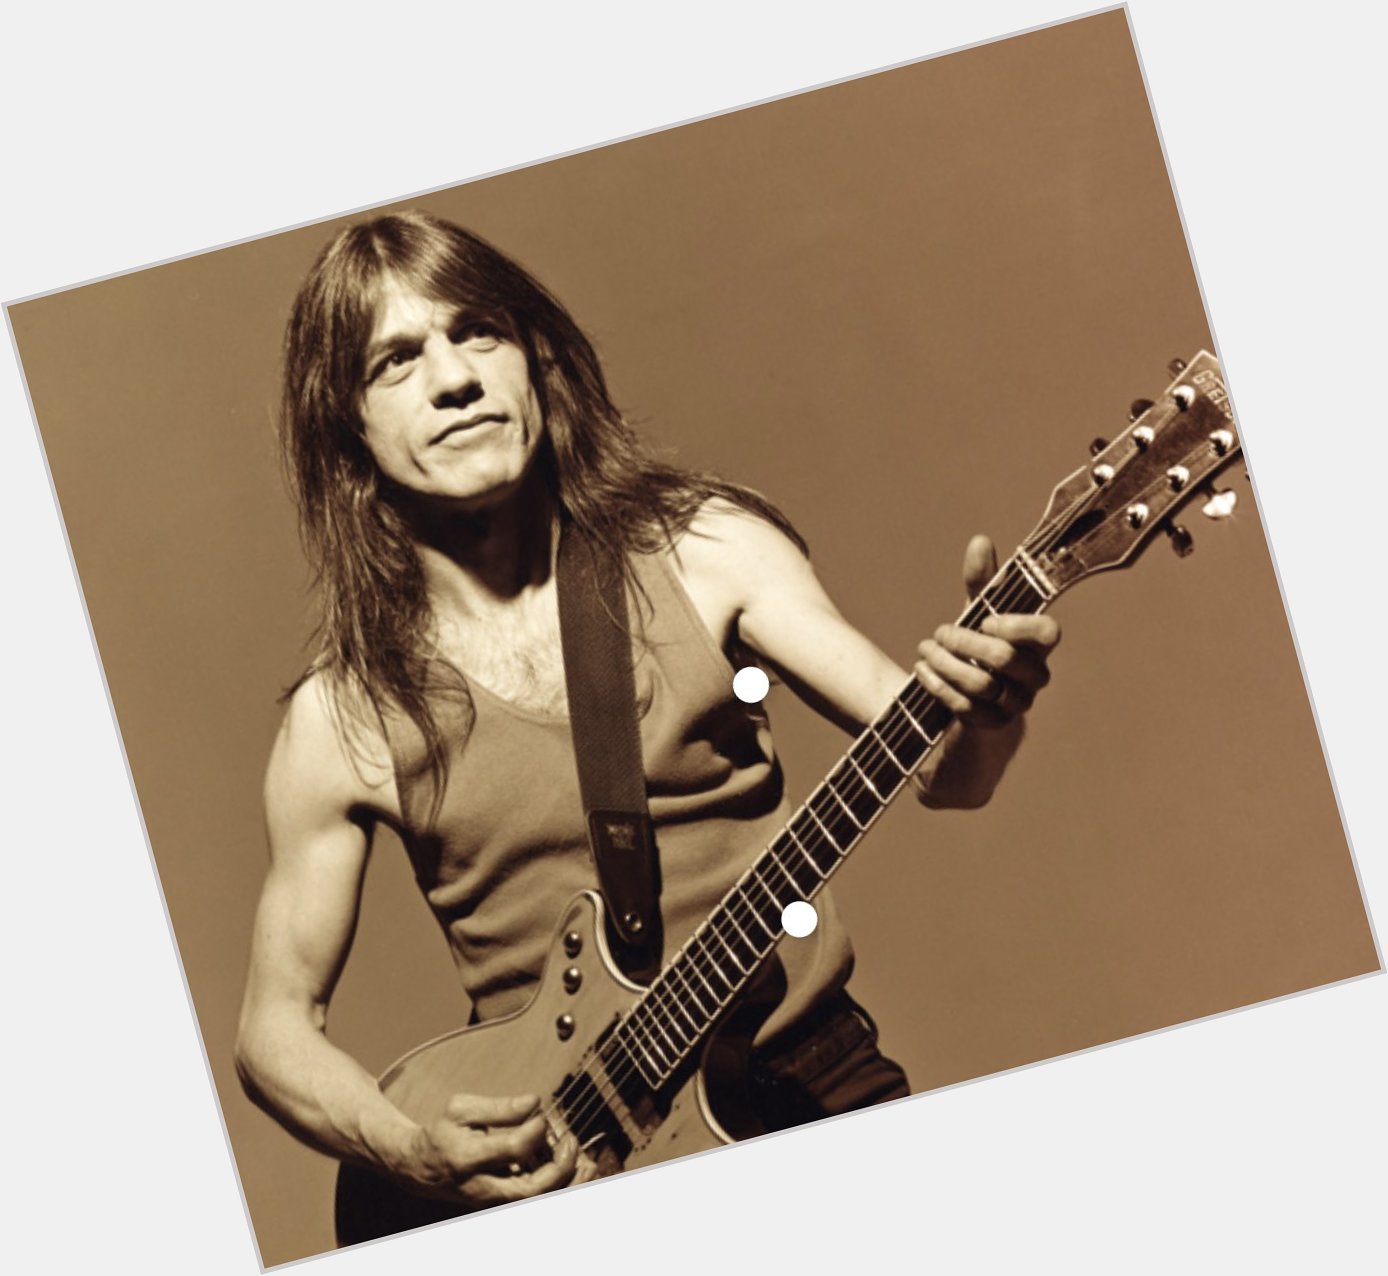  Happy Birthday to the late Malcolm Young. We ve learned a lot from you...never forgotten. 